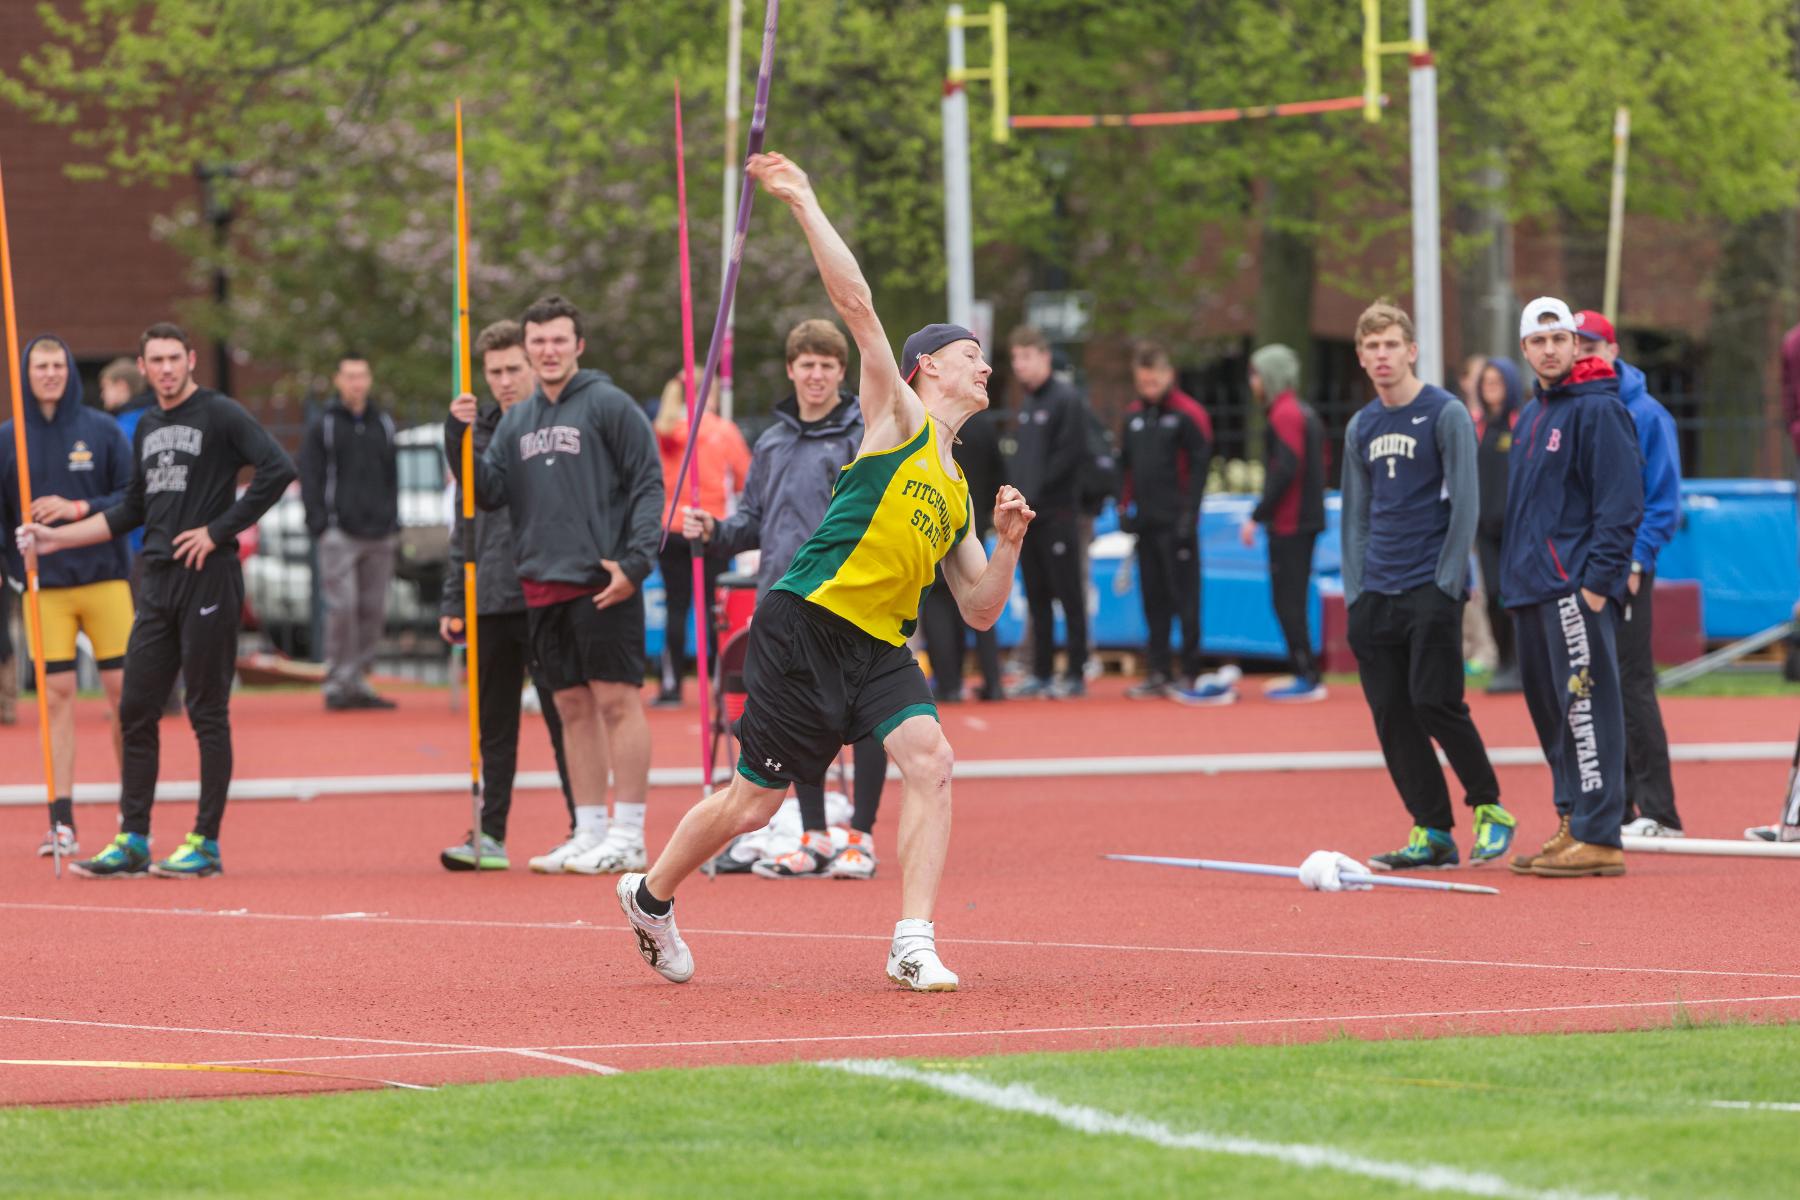 Stalters Competes At NCAA DIII Outdoor Track & Field National Championships